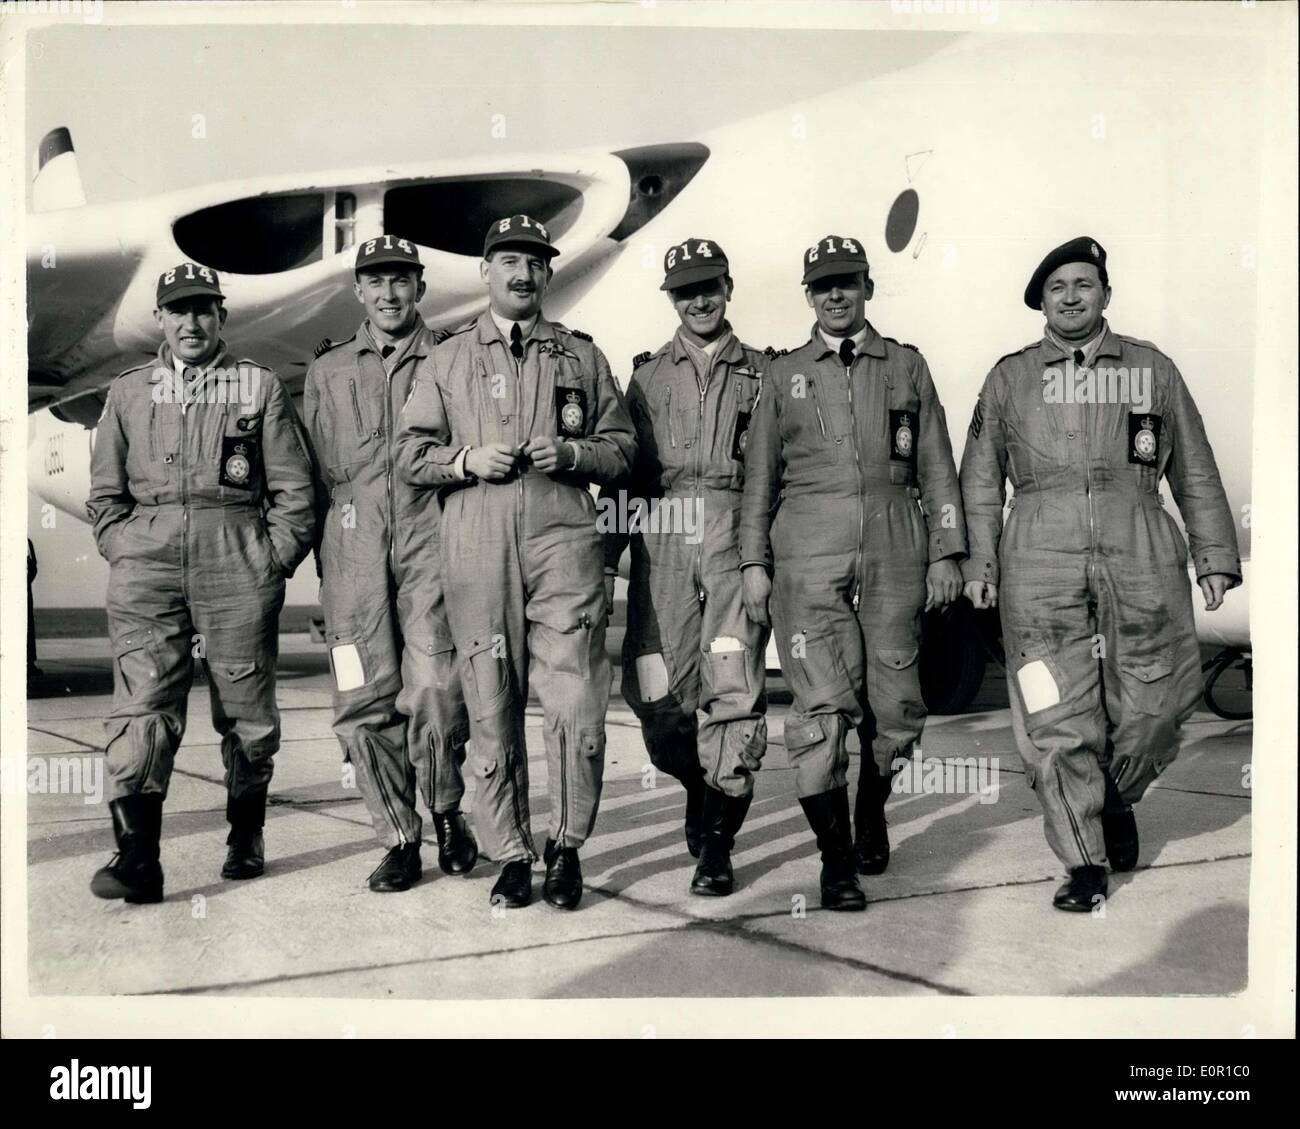 Aug. 11, 1957 - R.A.F. Crews Return from United States Bombing Tests. Land at Wittering - Northants.: The R.A.F. Bombing Teams who took part in the United States Strategic Air Com and's Bombing Contact - in Florida - returned to Wittering this afternoon. The teams returning including the Vliant which finished 11th. and 75th among the 90 crews. Photo shows complete with their ''American Kit'' - Master Sigaaller Eric Charles Brown; F/Lieut. George Bridson of Wigan - a Navigator; F/It. gordon Harper (31) co-pilot from Farmborough; S/LDR. Ronald Payne (34) Captain from London; S/LdR Stock Photo